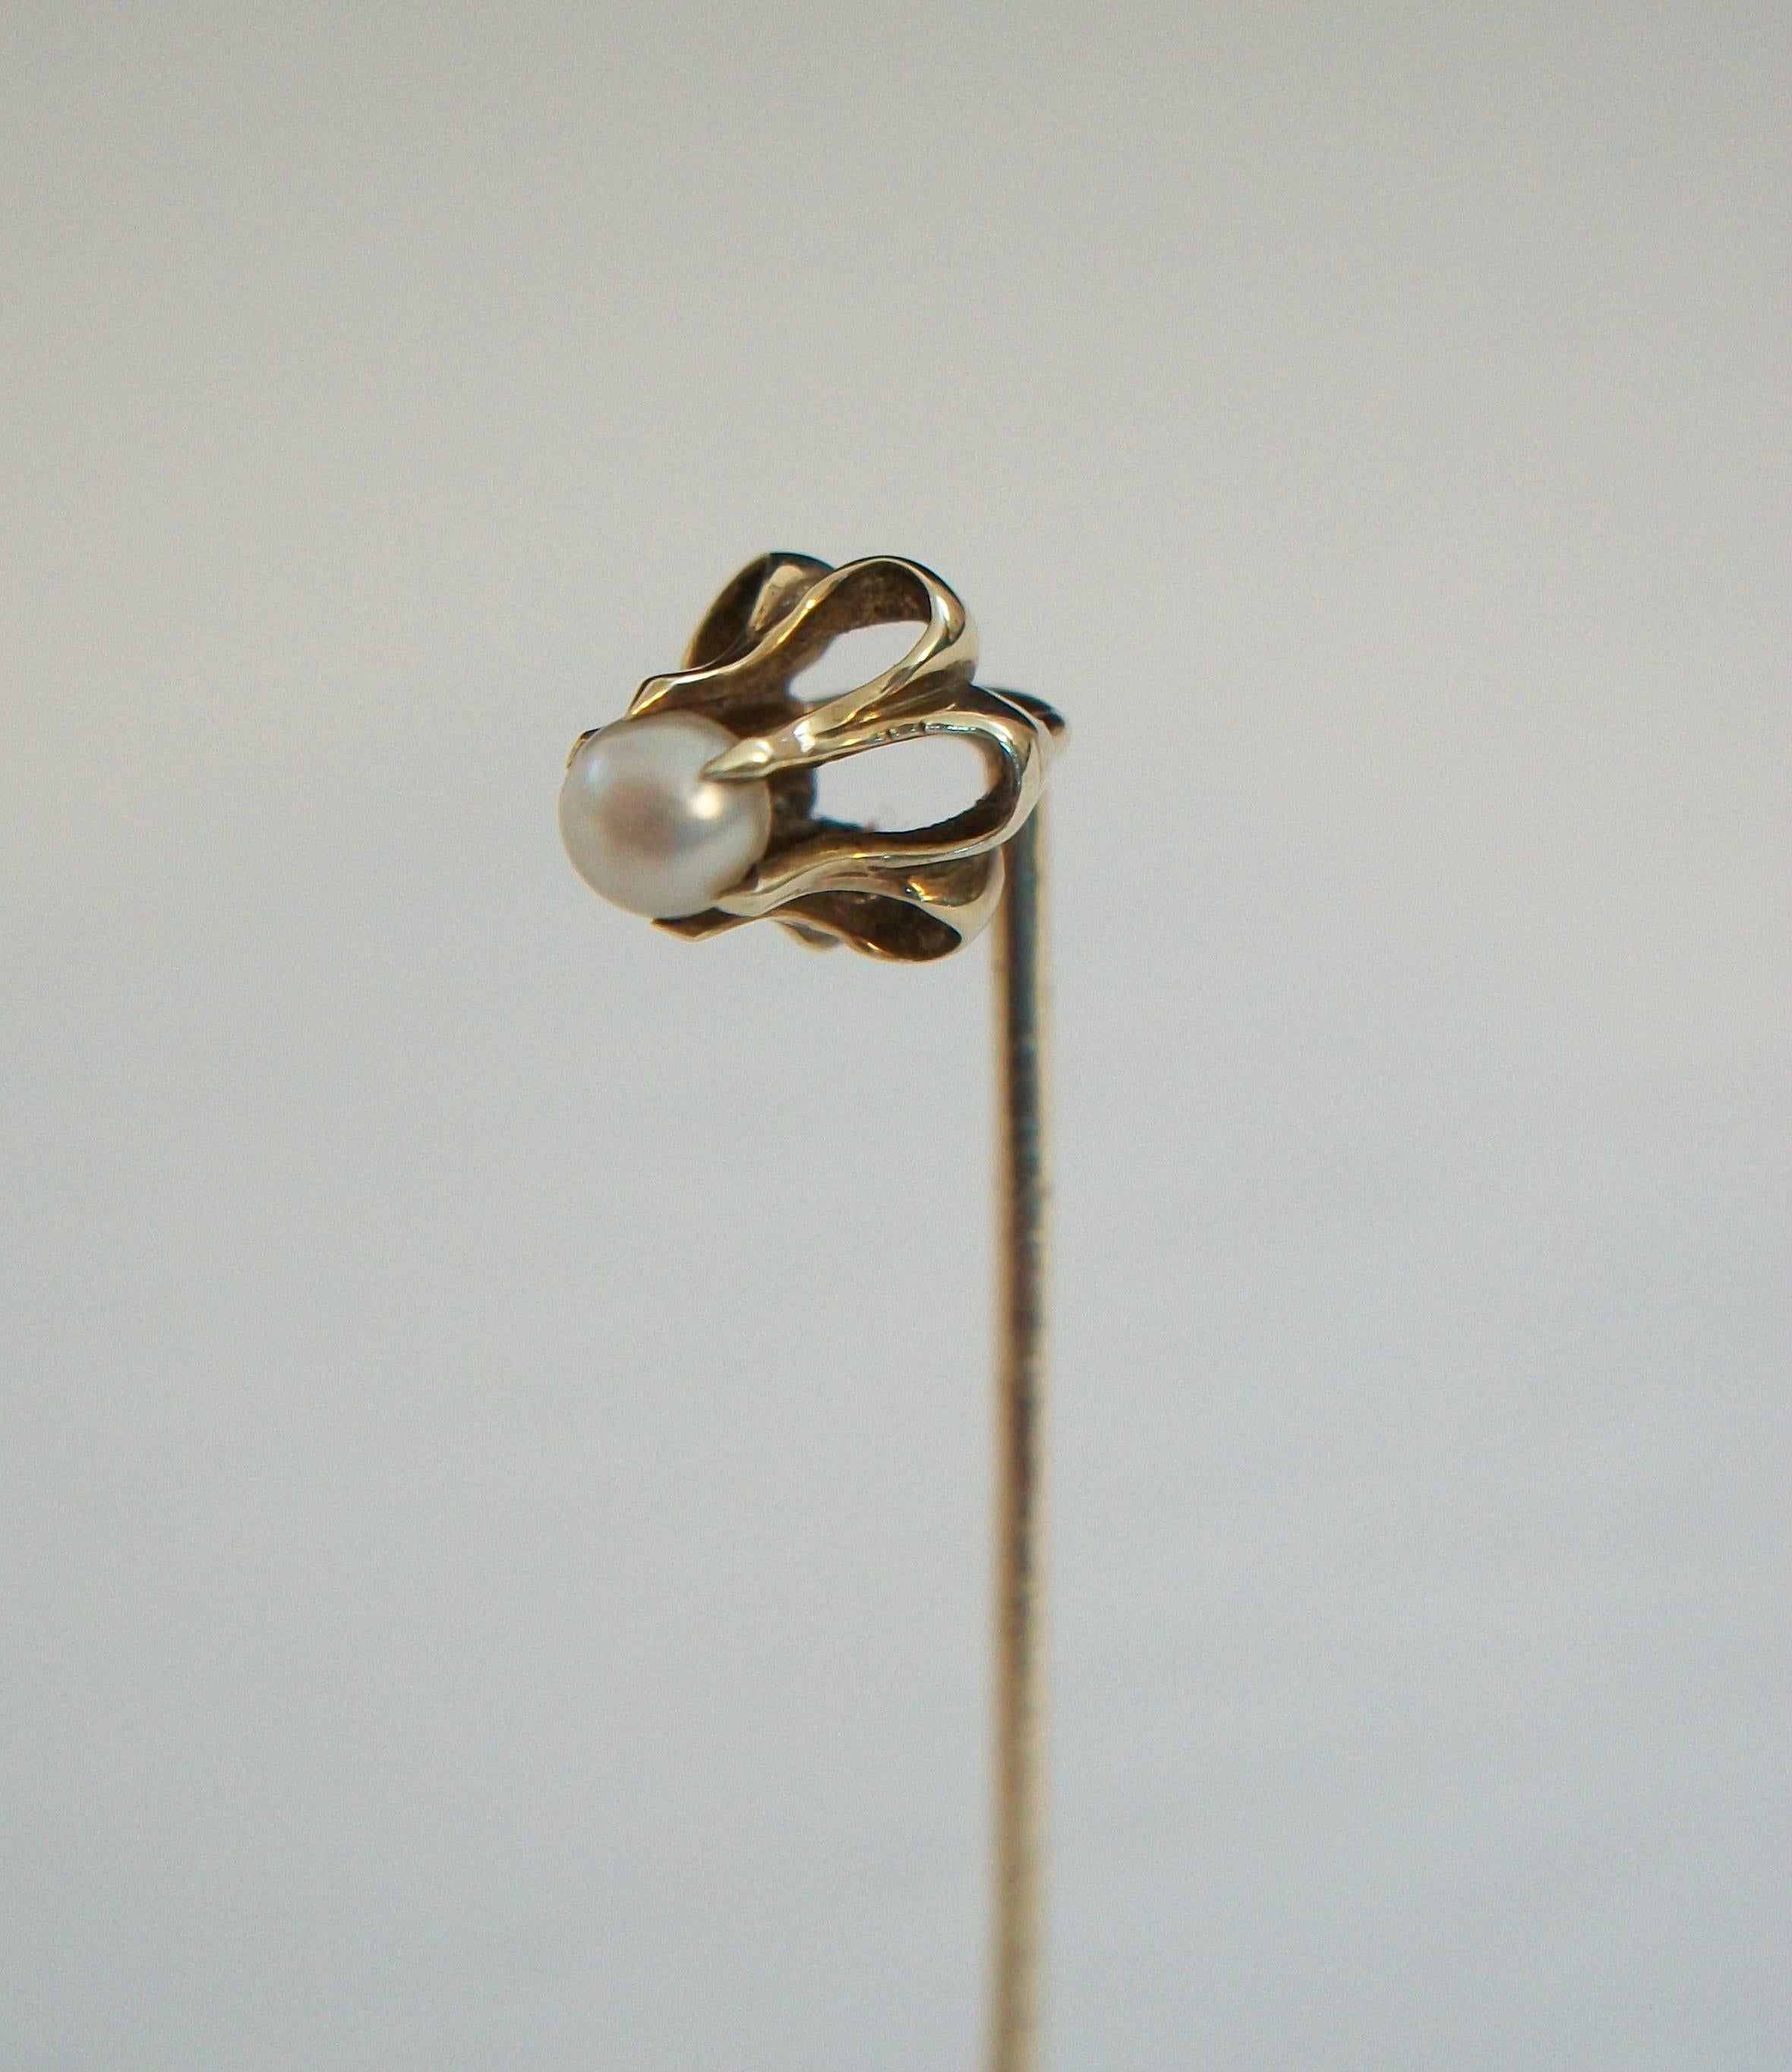 Art Nouveau 14K yellow gold and pearl stick pin - featuring a flowing stylized floral design set with a single pearl (3 mm. diameter) - hand made - stamped 14K on the pin - United States (likely) - circa 1910.

Excellent antique condition - all